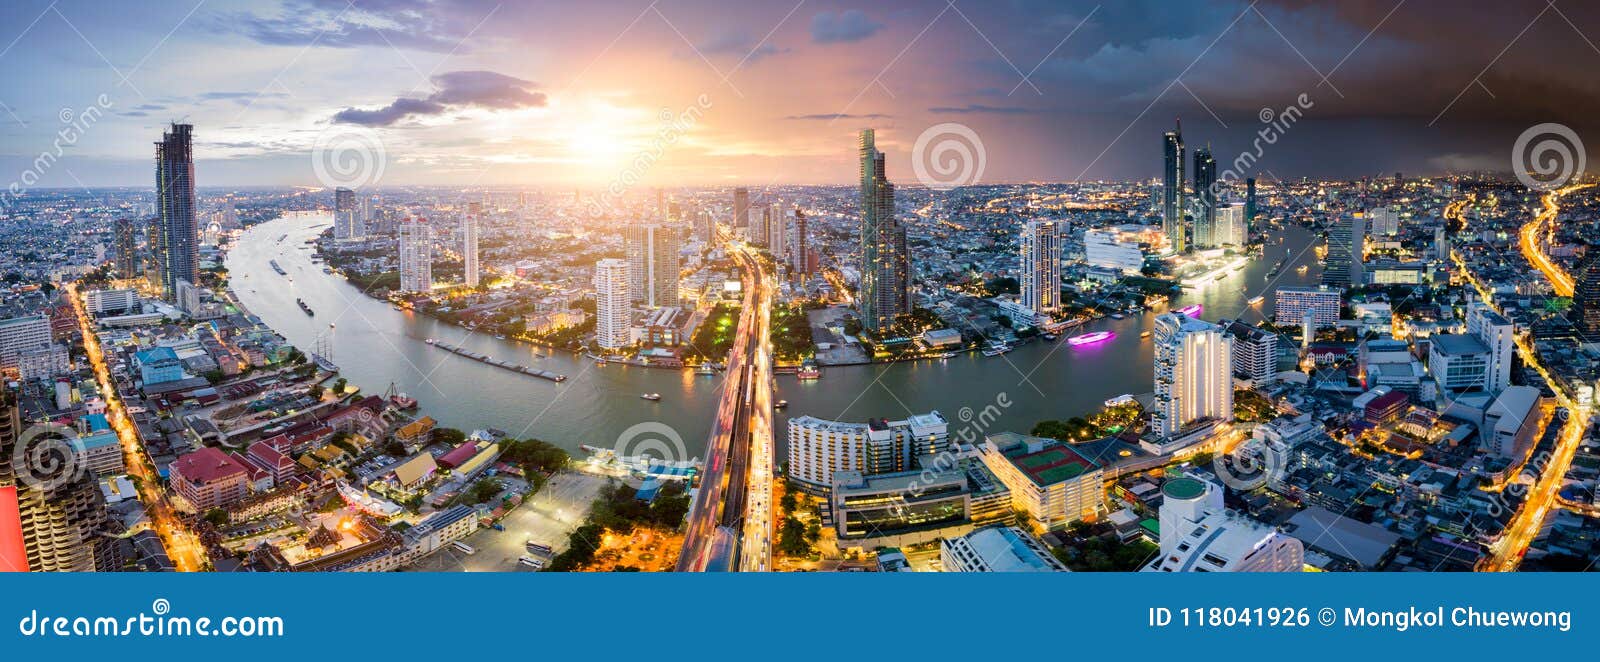 aerial view of bangkok skyline and skyscraper with light trails